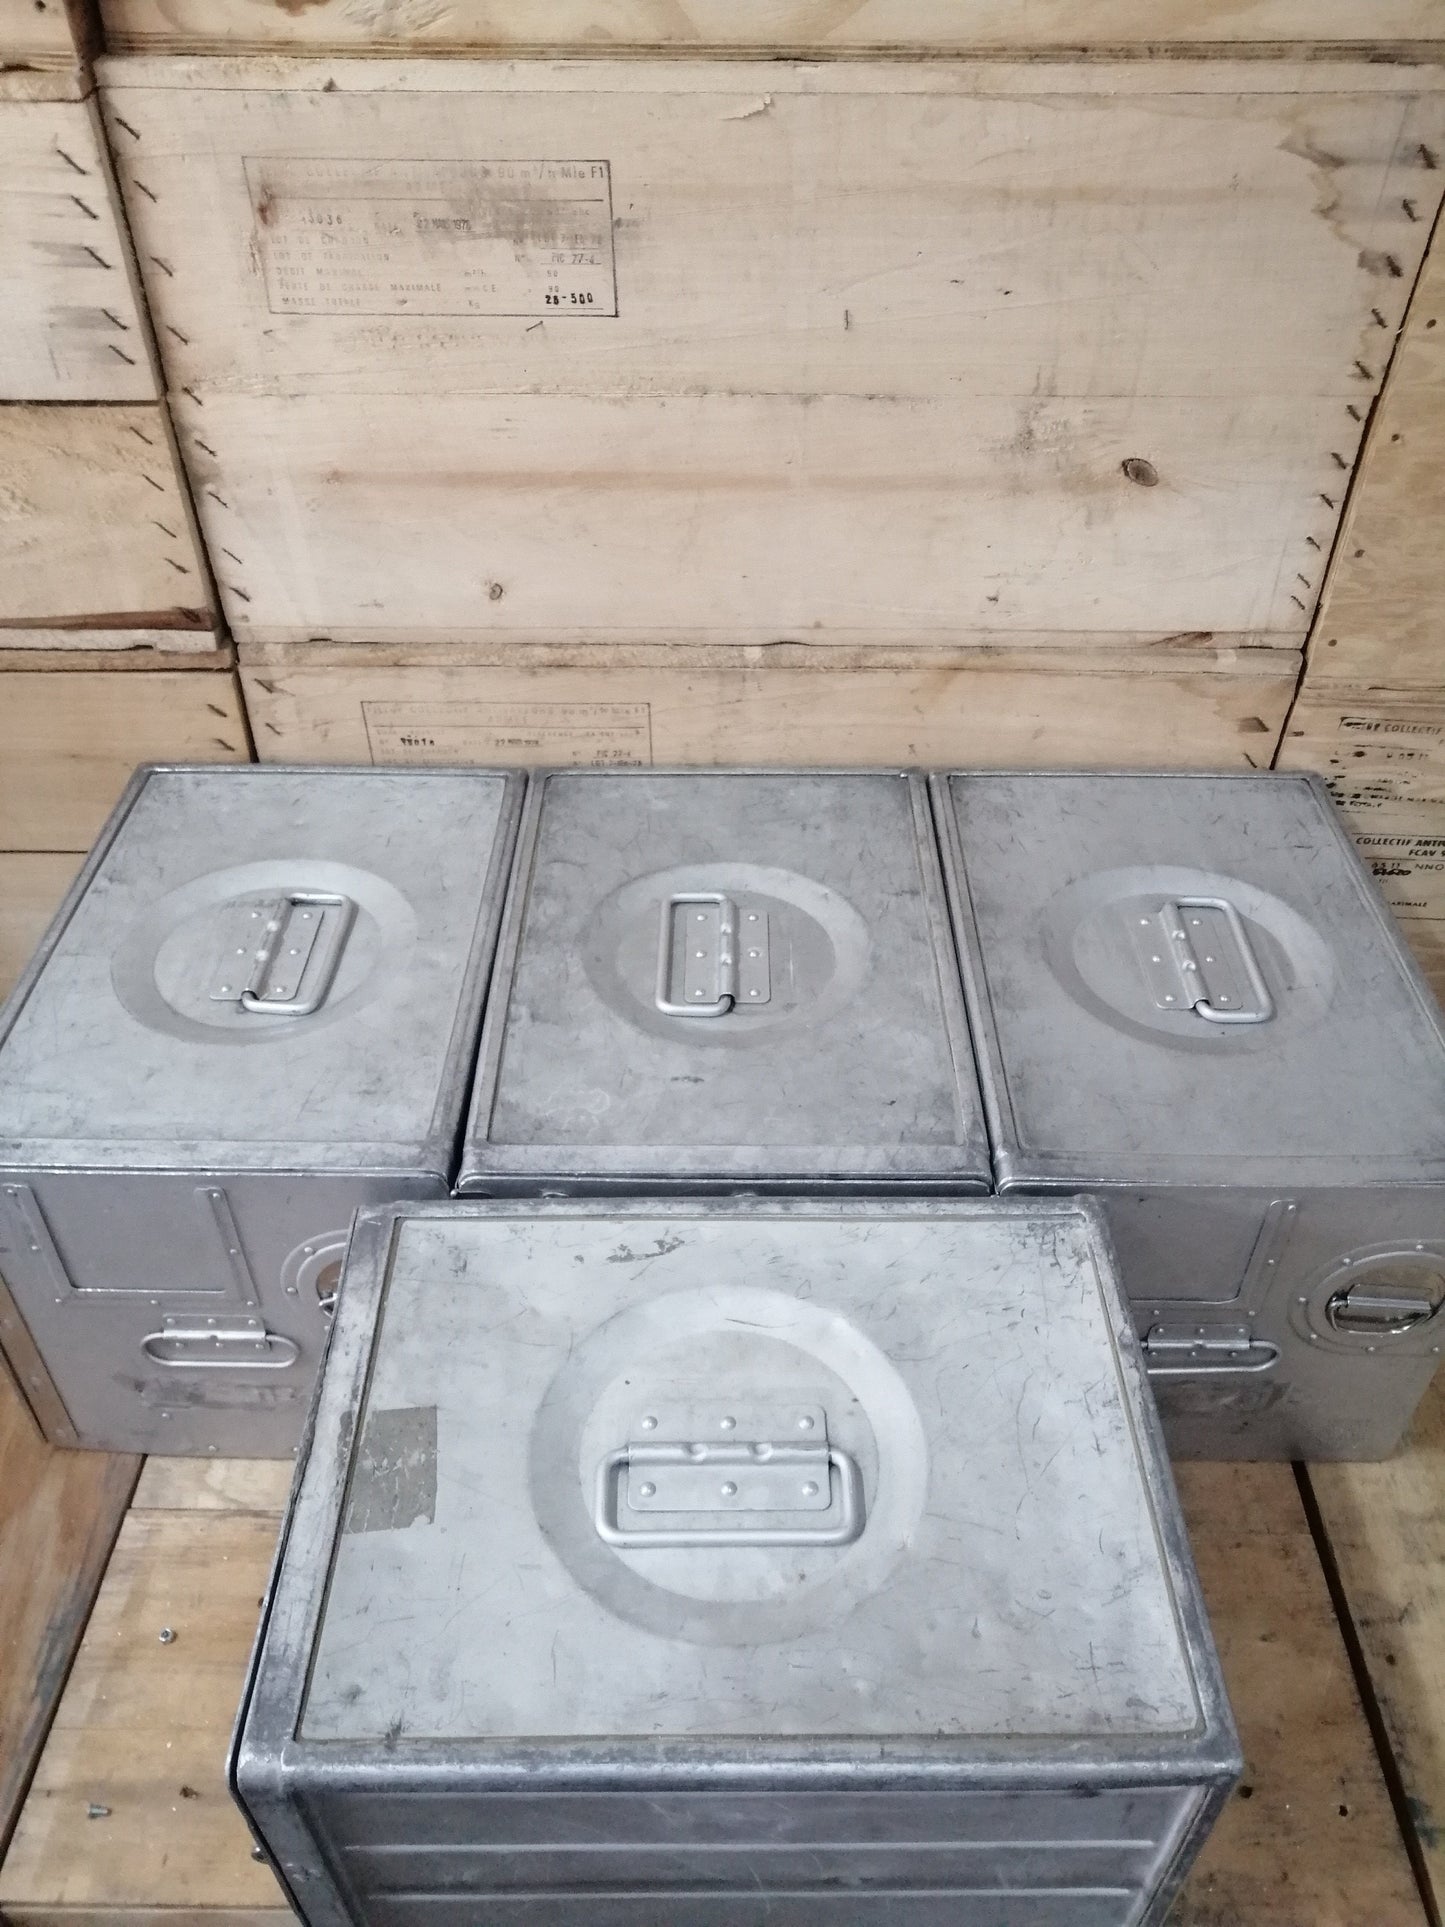 Air Transat - Original Airline Galley Box, Aircraft Storage Container, Industrial Cabinet